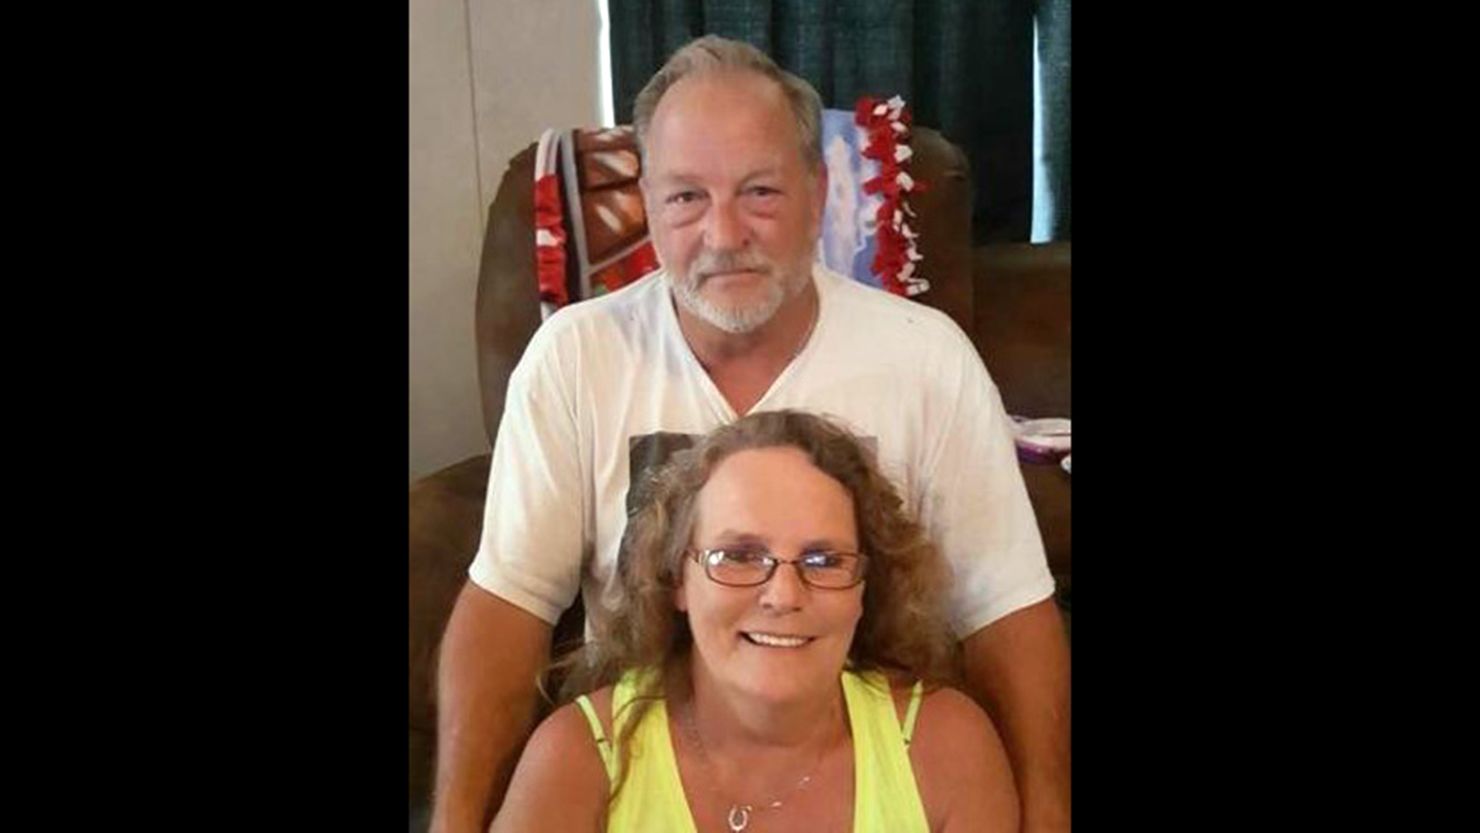 Ronald and Valerie Kay Wilkson were killed on October 23 by Oklahoma fugitive Michael Vance during his week-long crime spree